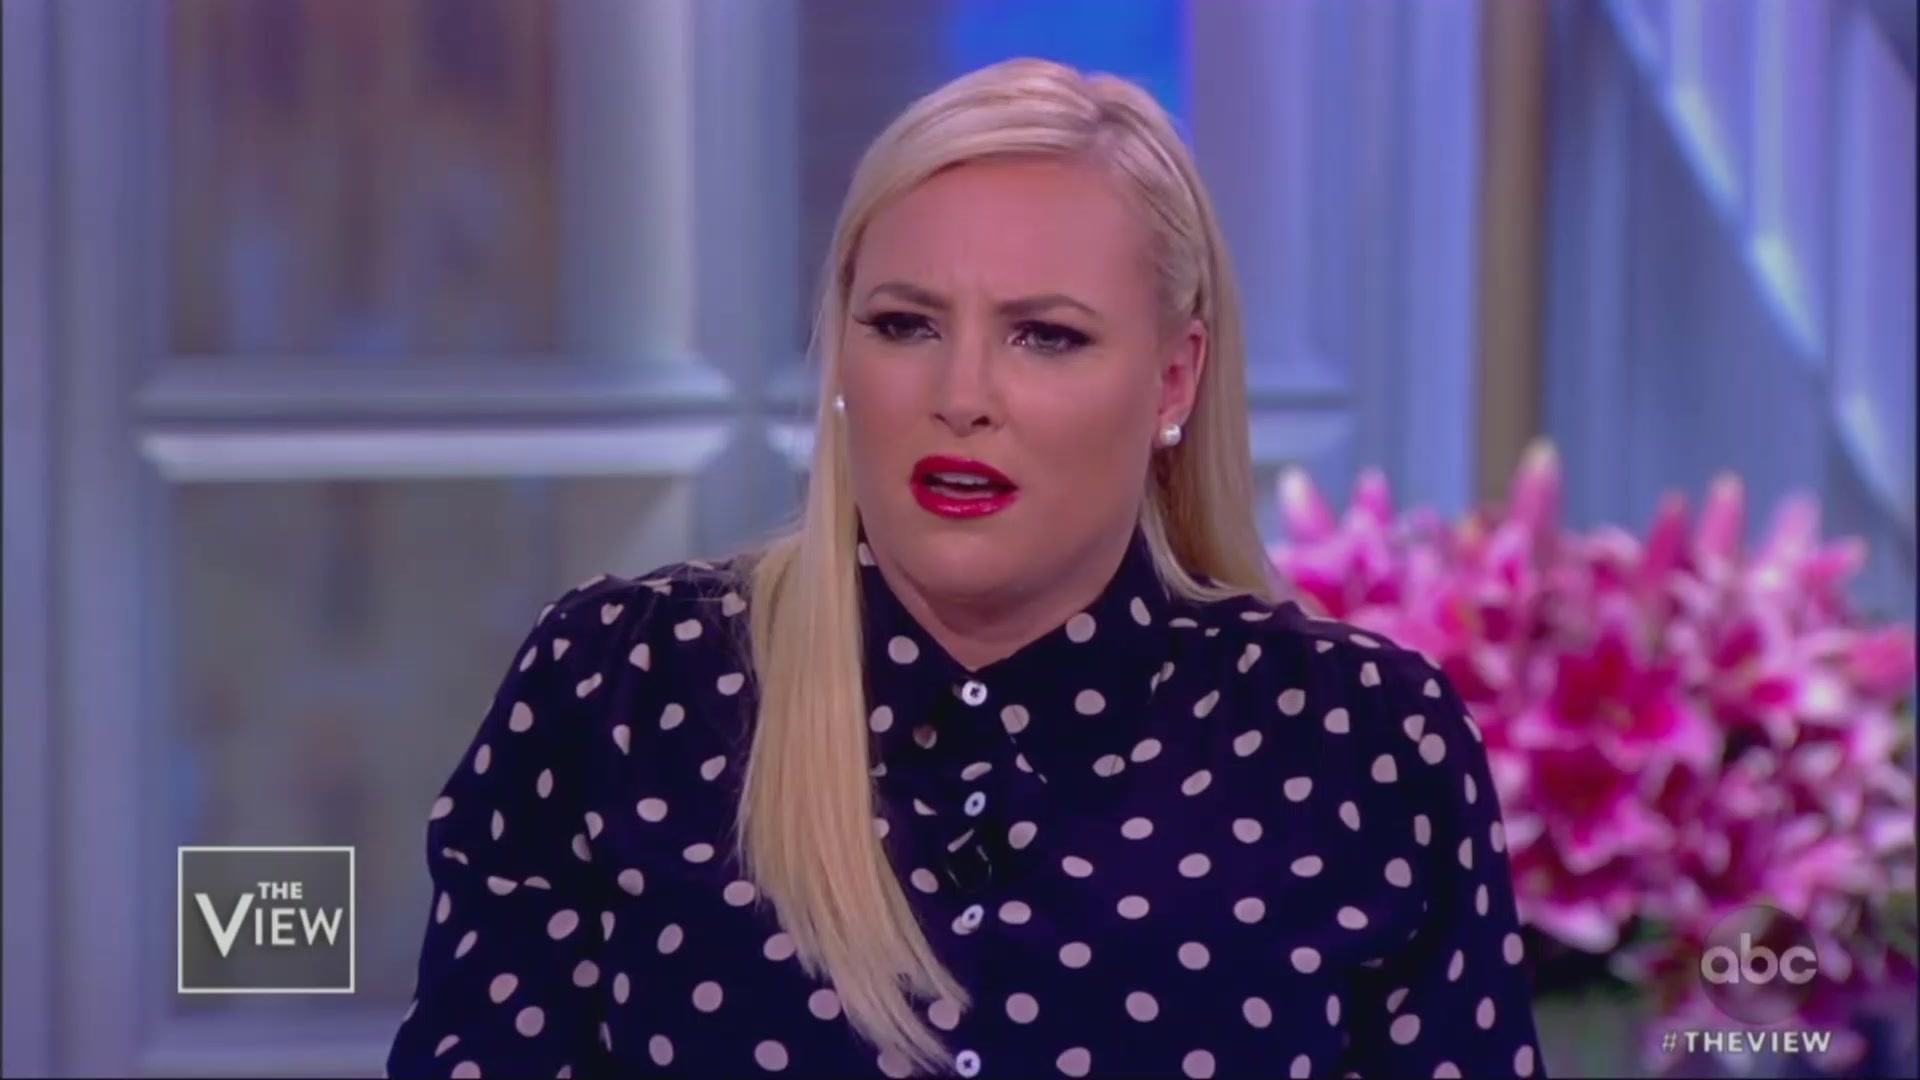 Whoopi Goldberg Scolds Meghan McCain for Accusing Her of Laughing About Terrorism: ‘Don’t Do That!’